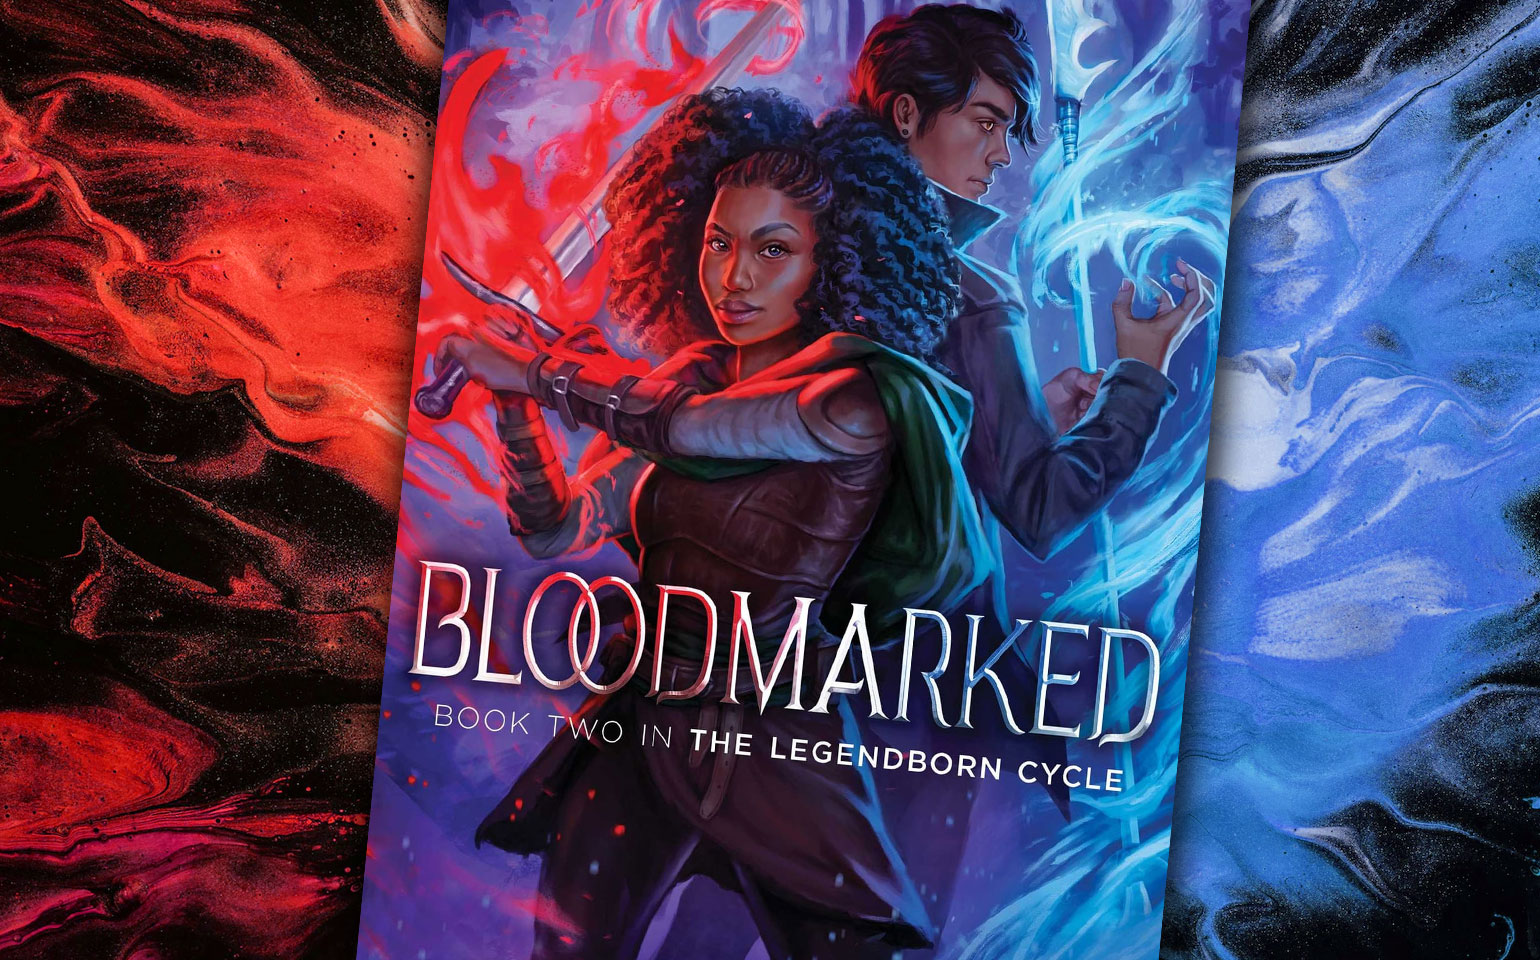 The cover of the Legendborn Cycle book Bloodmarked is shown, with a woman holding a bow and arrow.